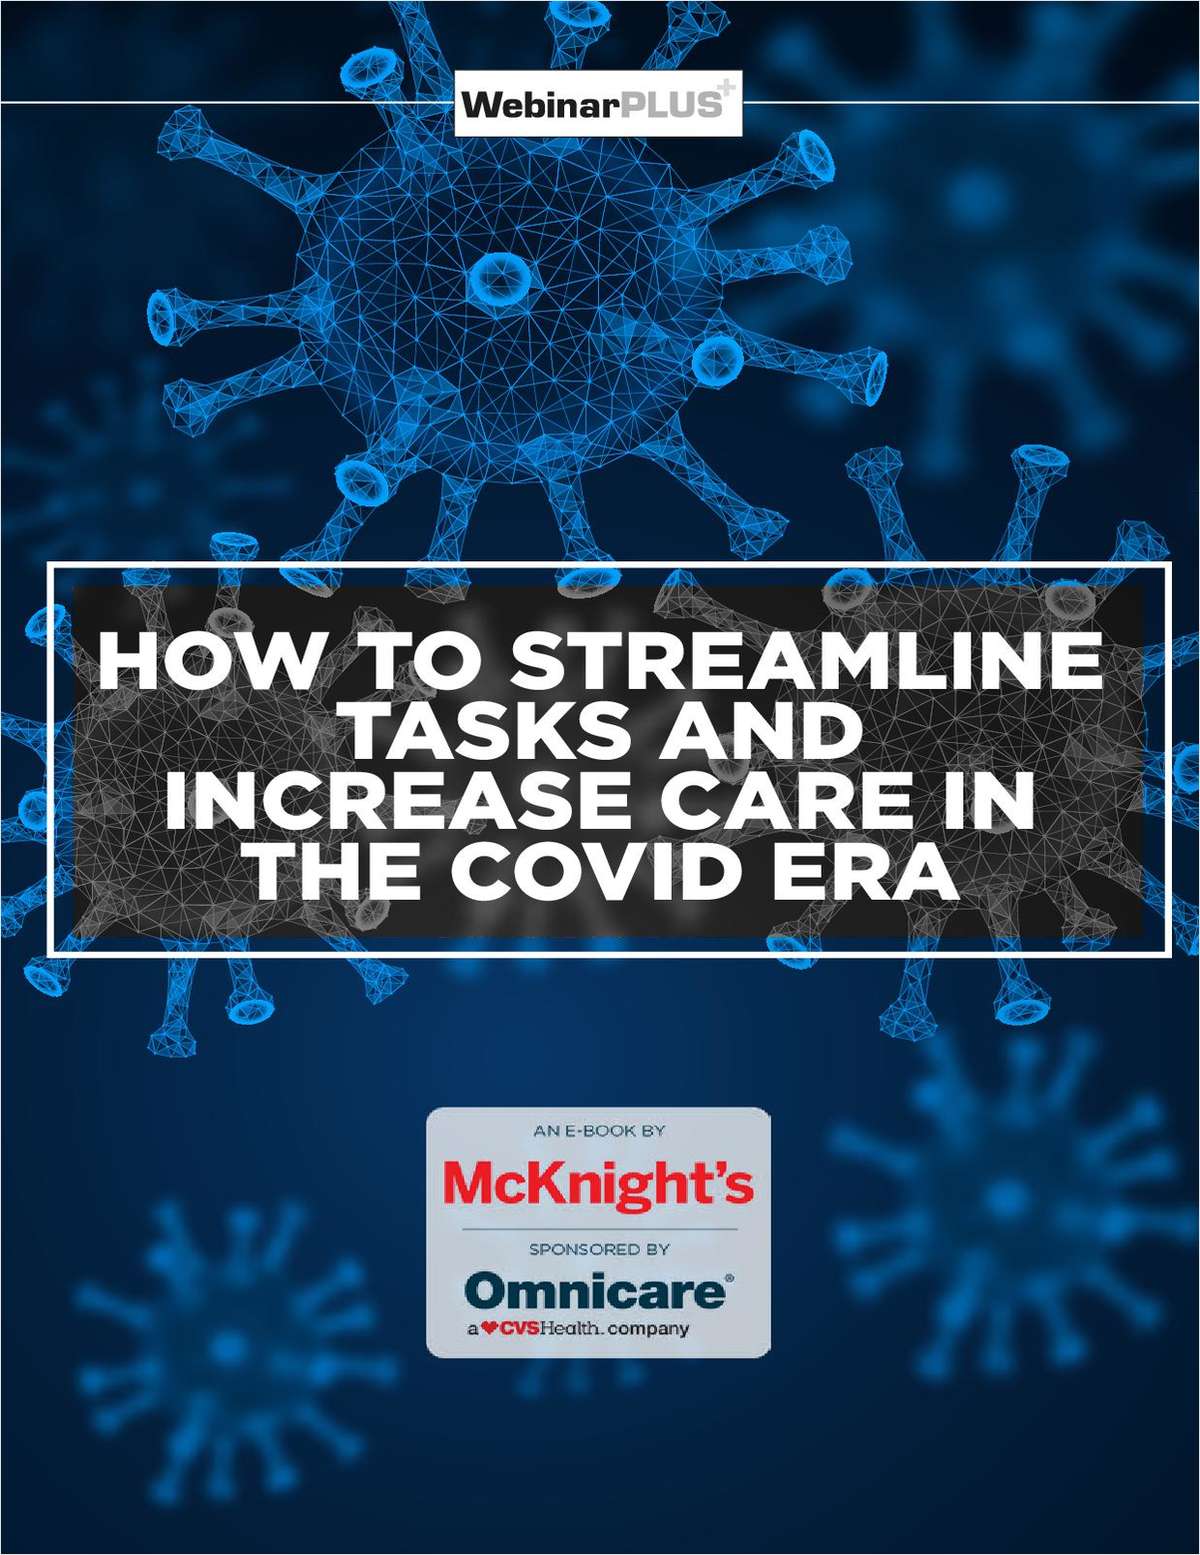 How to Streamline Tasks and Increase Care in the COVID Era